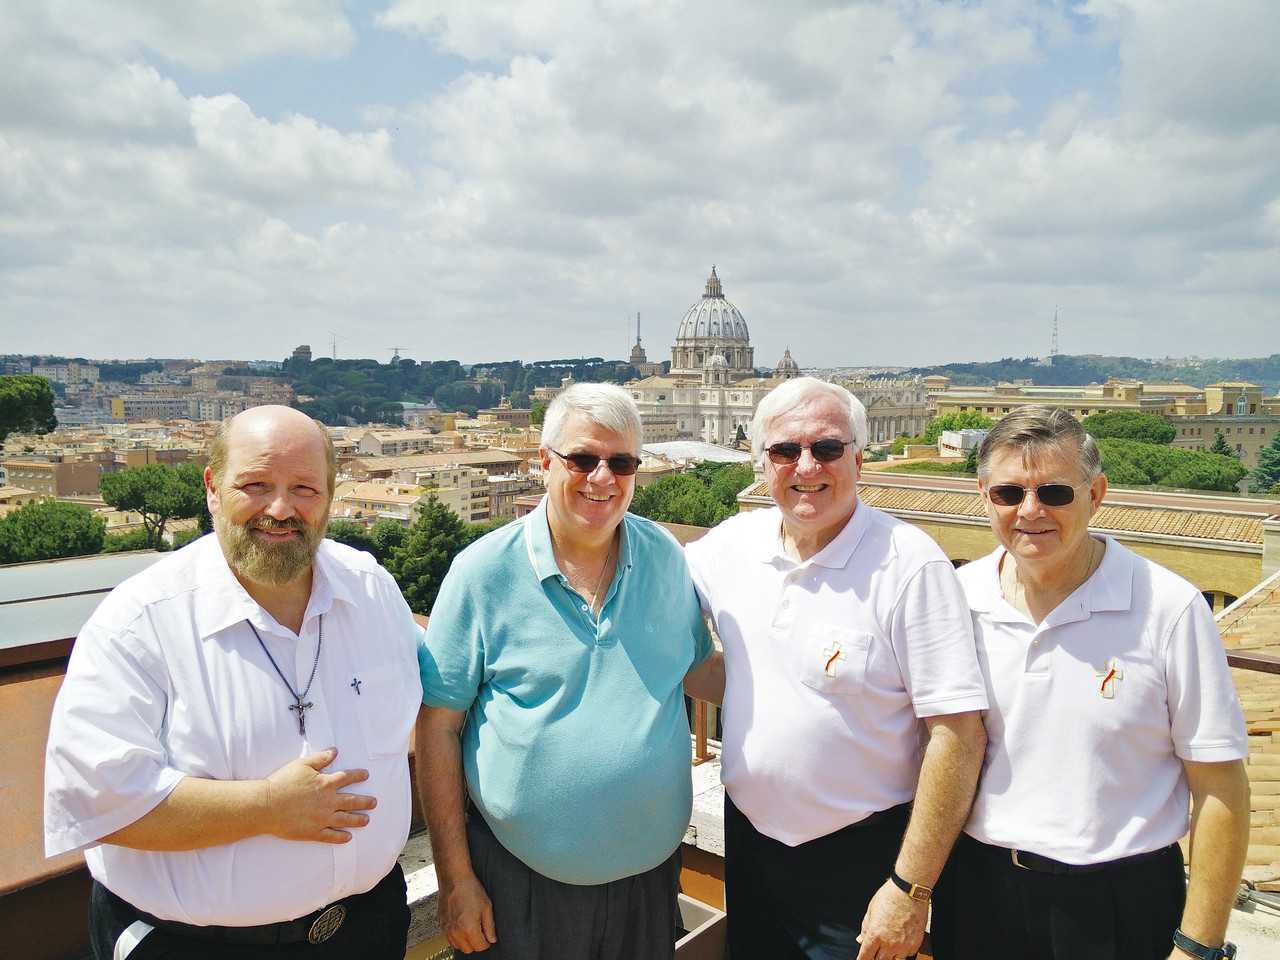 YEAR OF MERCY PILGRIMAGE: Deacon John Silvia, Deacon Bud Remillard, Deacon Robert Lafond and Deacon Cy Cote pose for a photo in front of the dome of St. Peter’s Basilica during their trip to the Vatican for the Jubilee of Deacons, May 27 through 29.